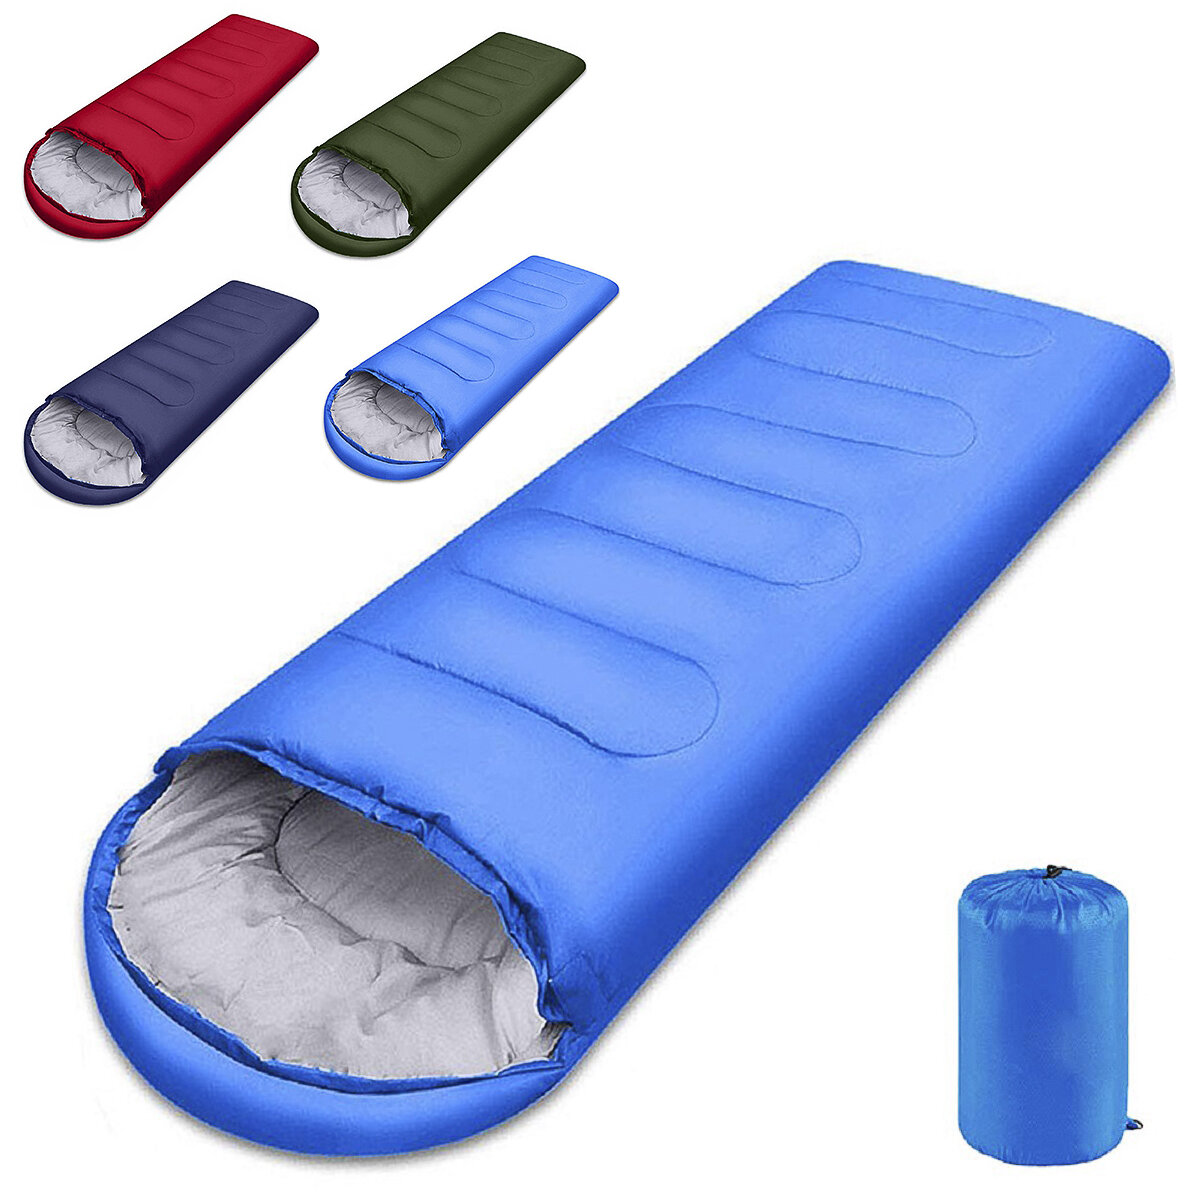 Image of Outdoor Waterproof Compression Sleeping Bag Lightweight Sleep Bag With Storage Package For Camping Travel Drift Hiking